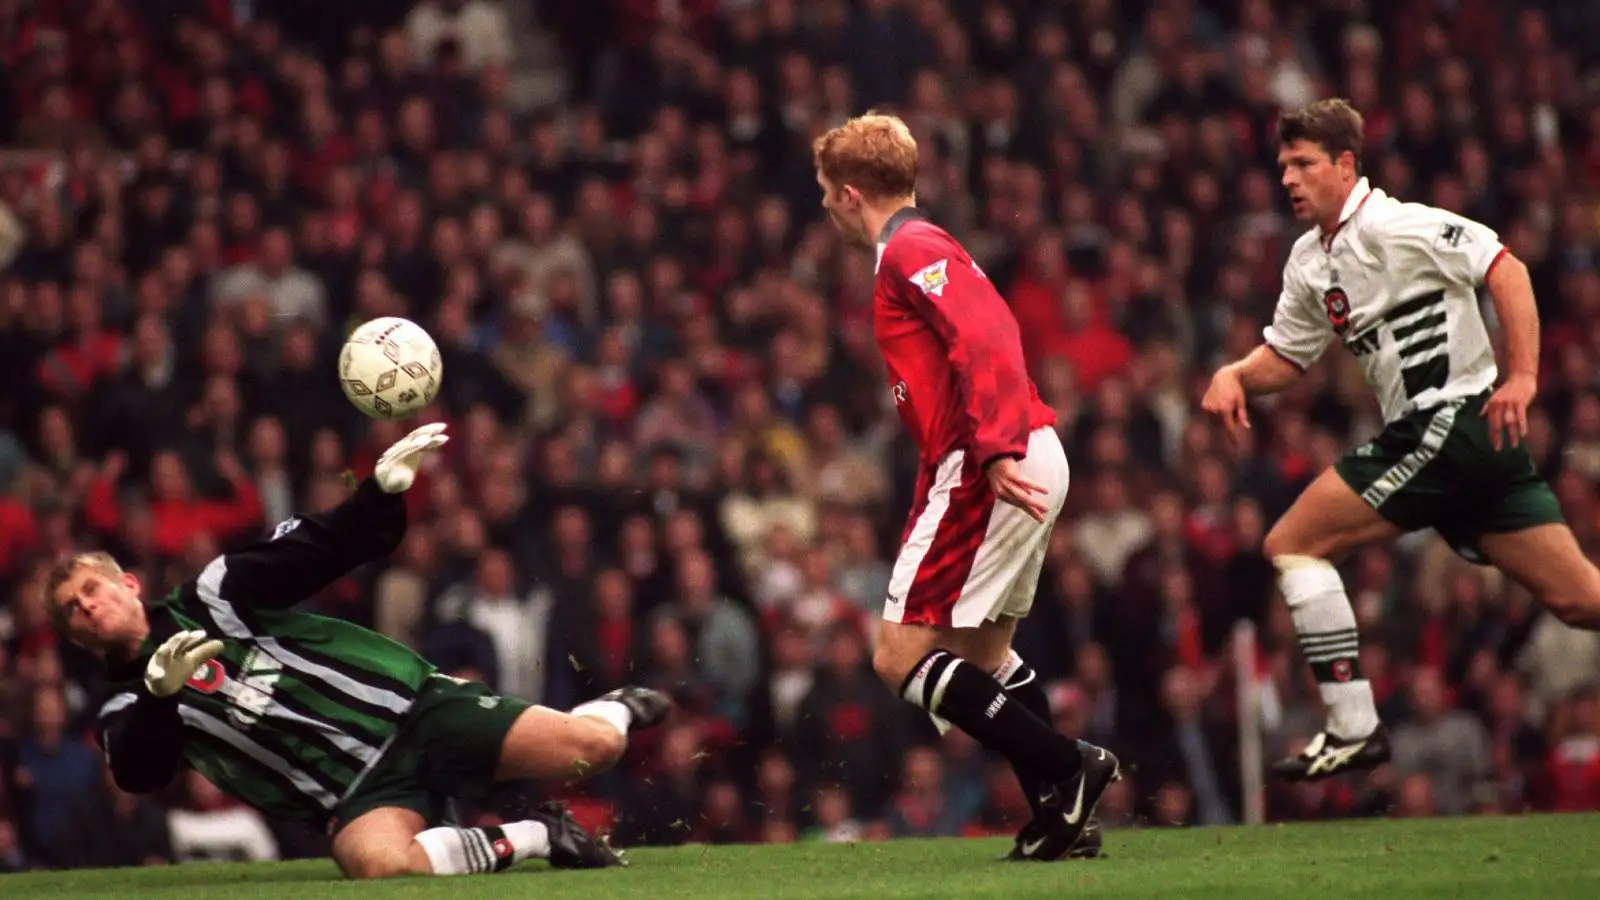 When Paul Scholes made tw*ts of Barnsley’s defence with the filthiest first touch ever